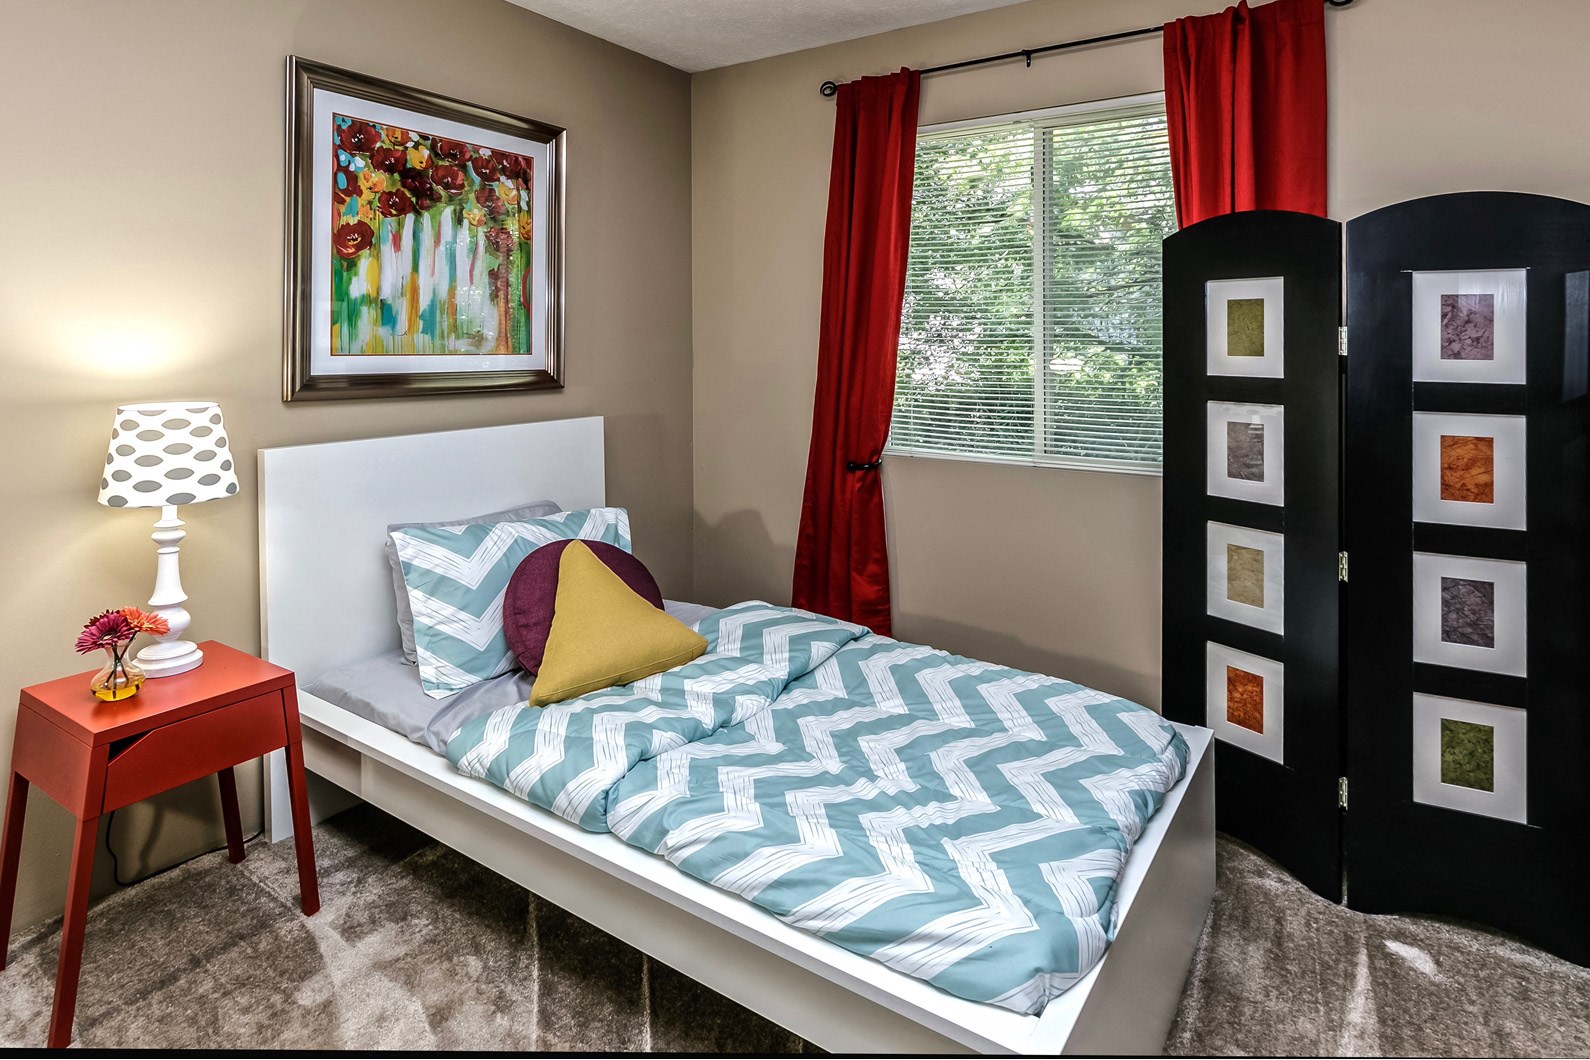 One, two, and three bedroom apartments homes at Fox Valley Apartments in Omaha, NE